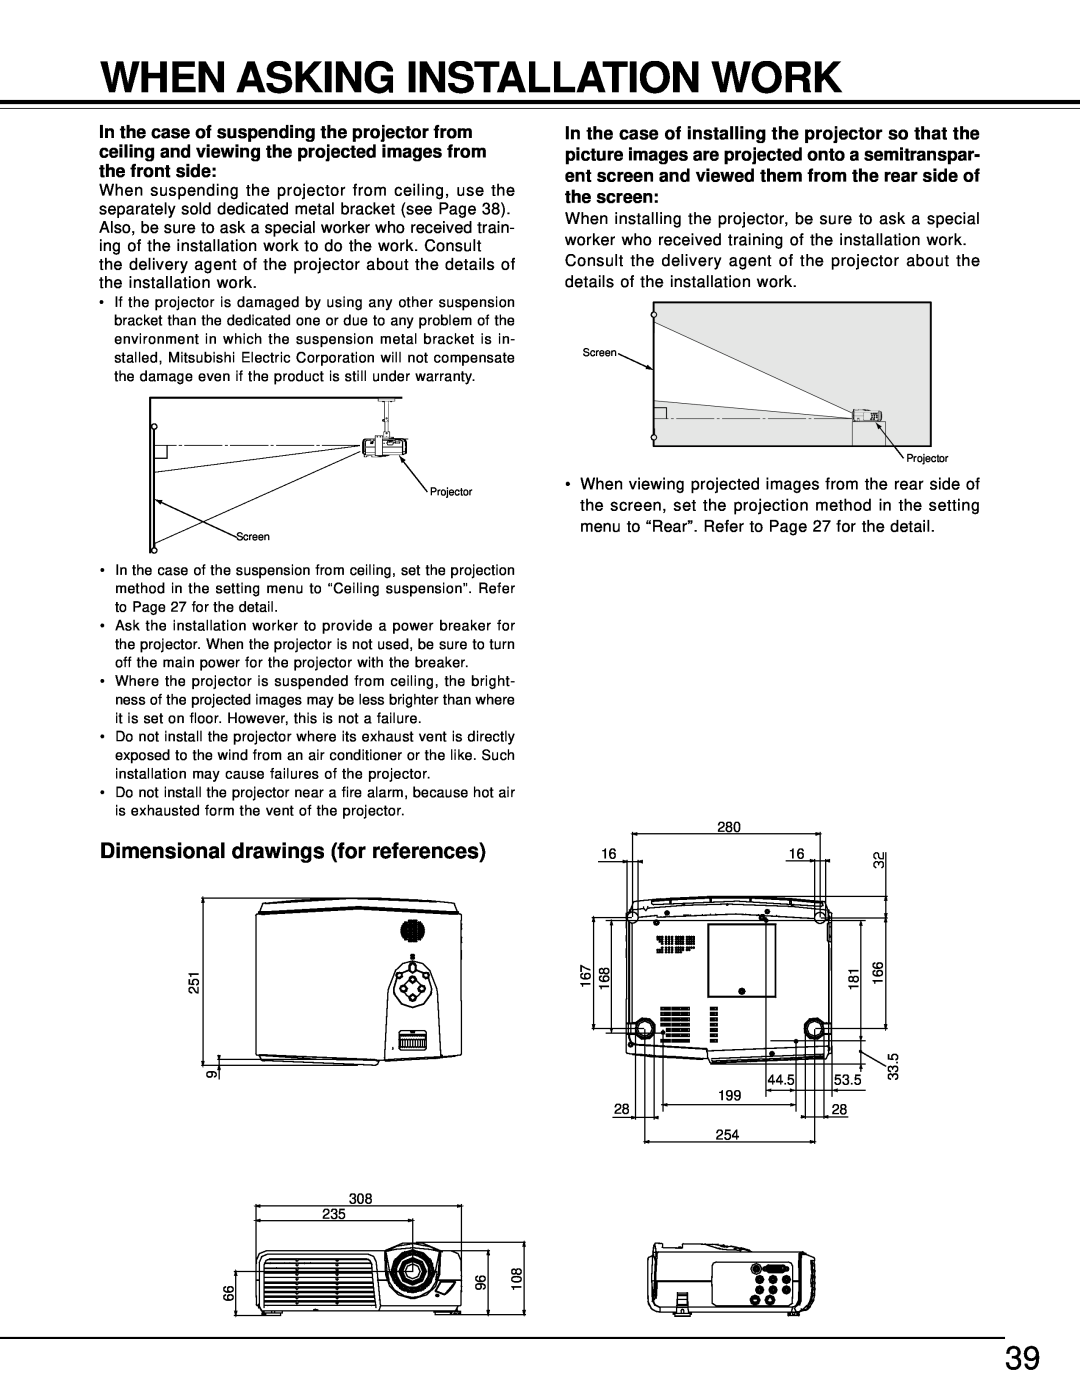 Toshiba TDP-MT500 owner manual When Asking Installation Work, Dimensional drawings for references 